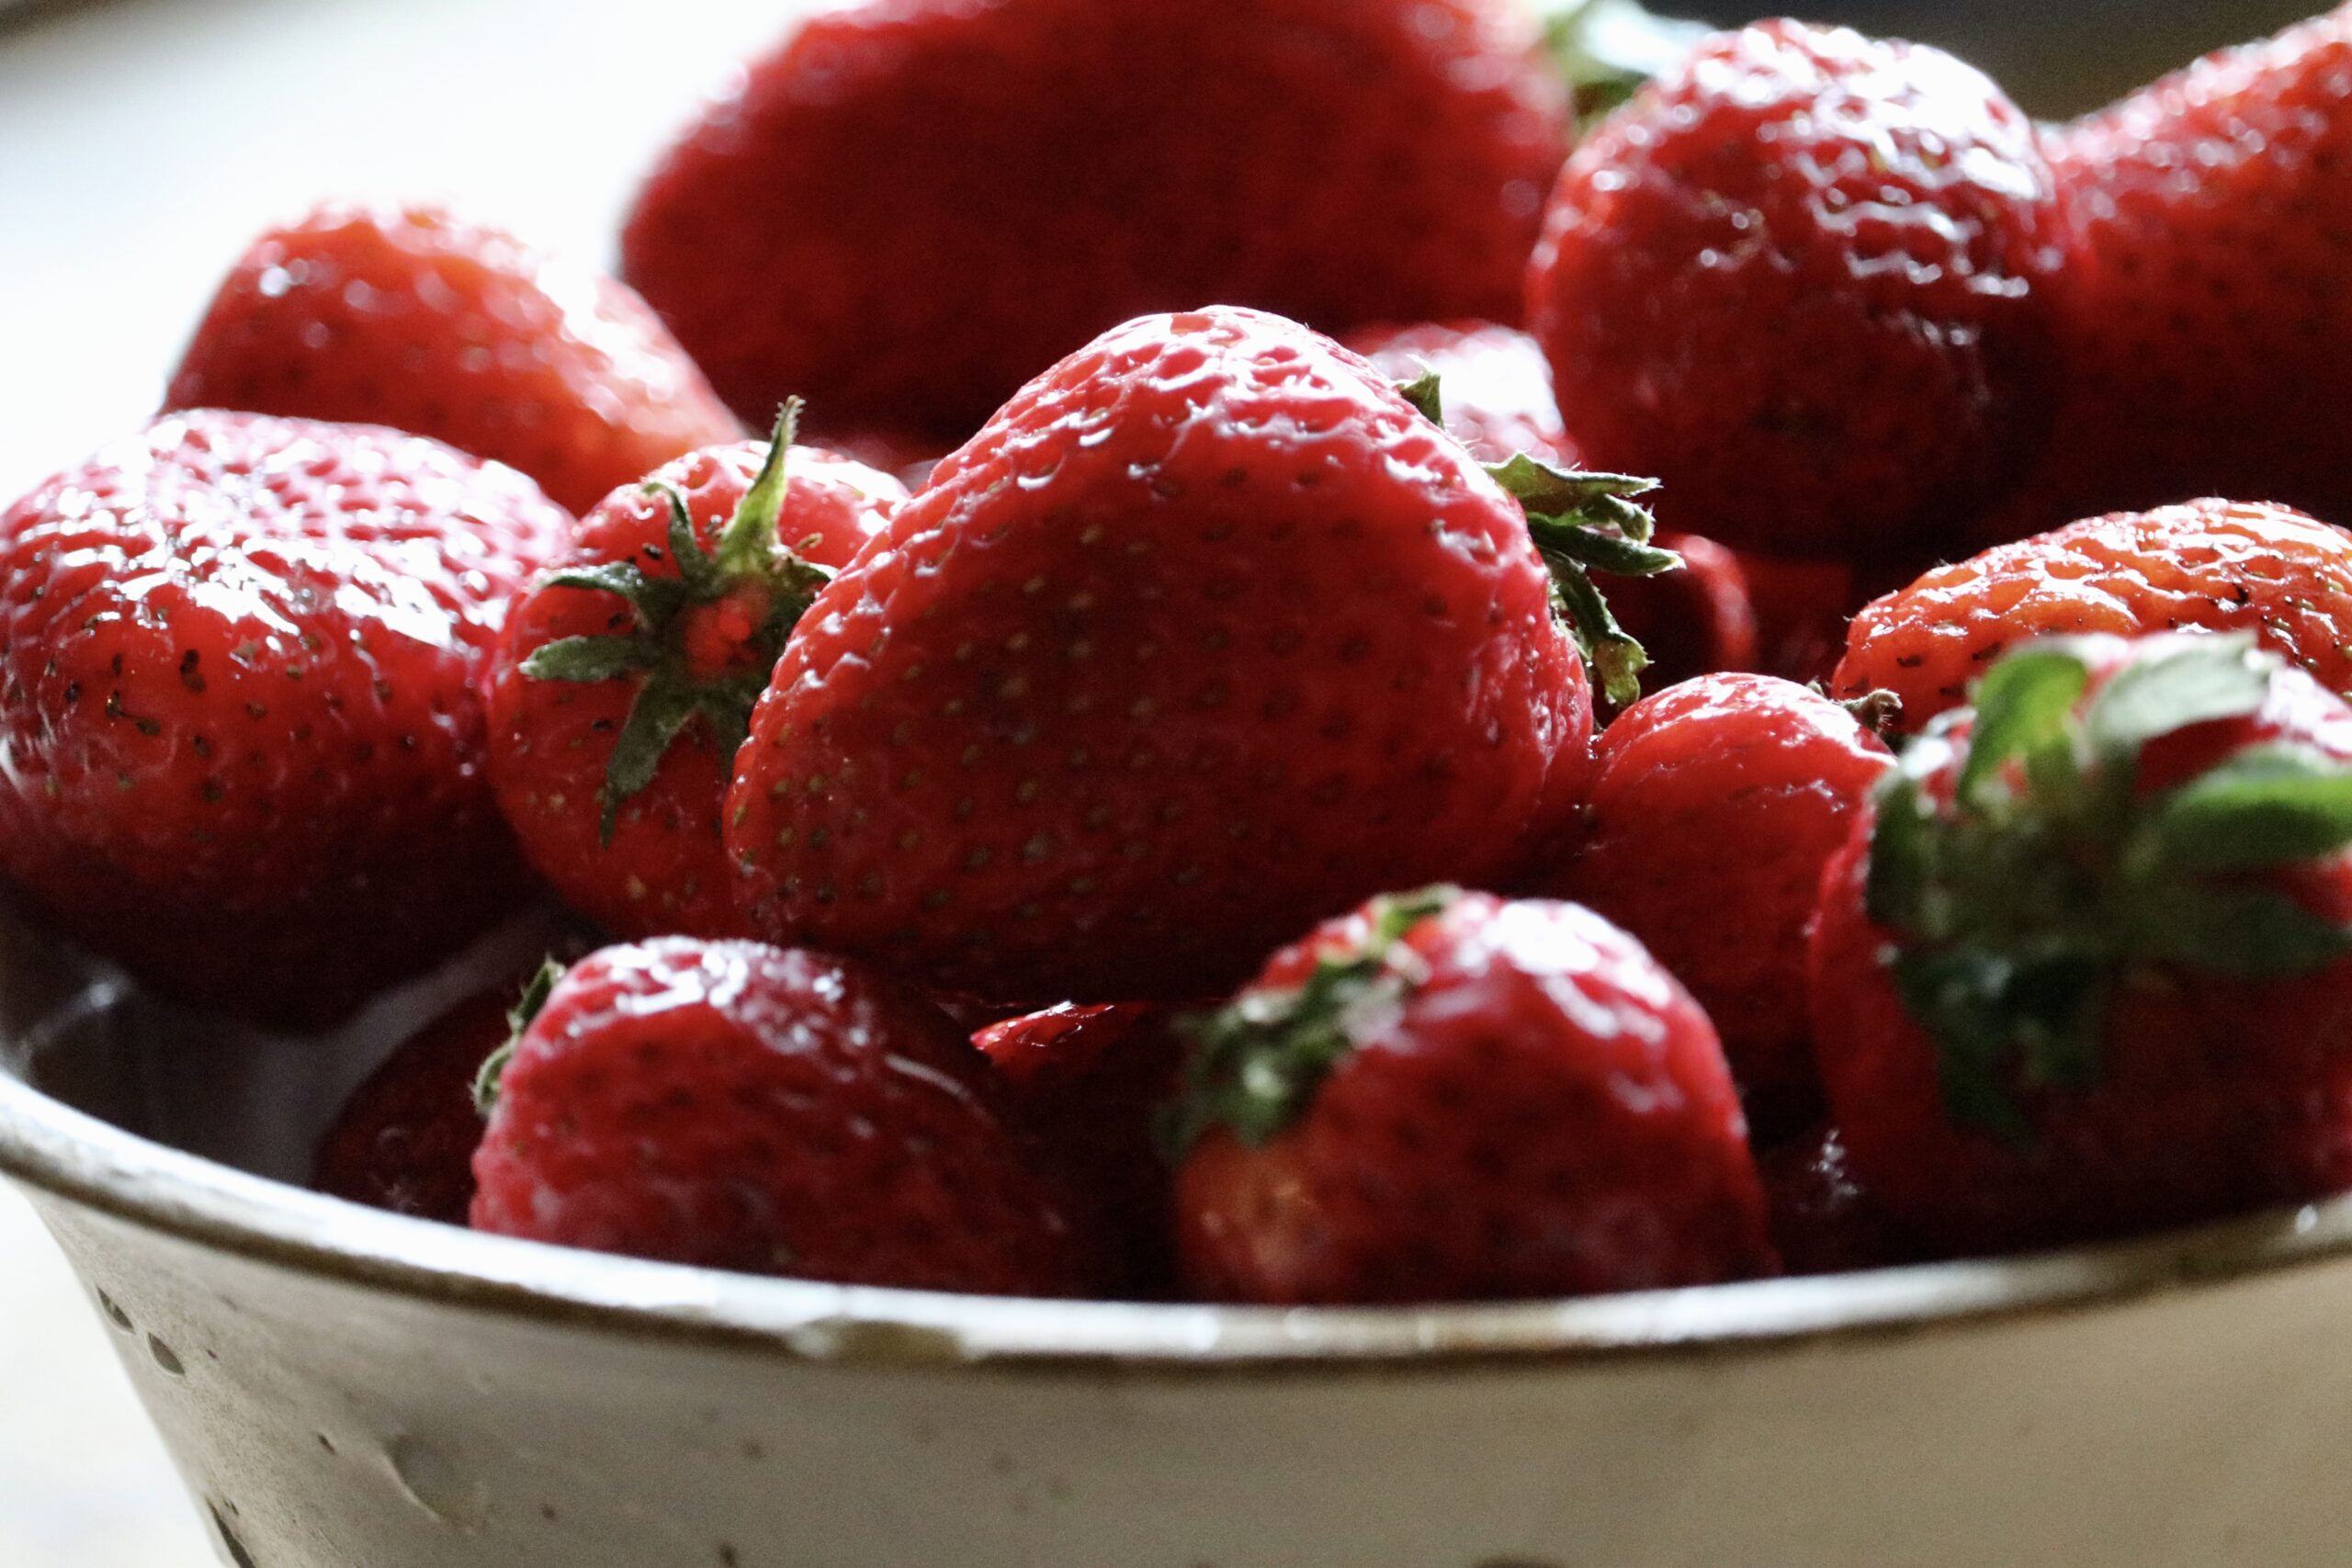 Bowl of strawberries from Schuh Farms, grown in the Skagit Valley_strawberry shortcake